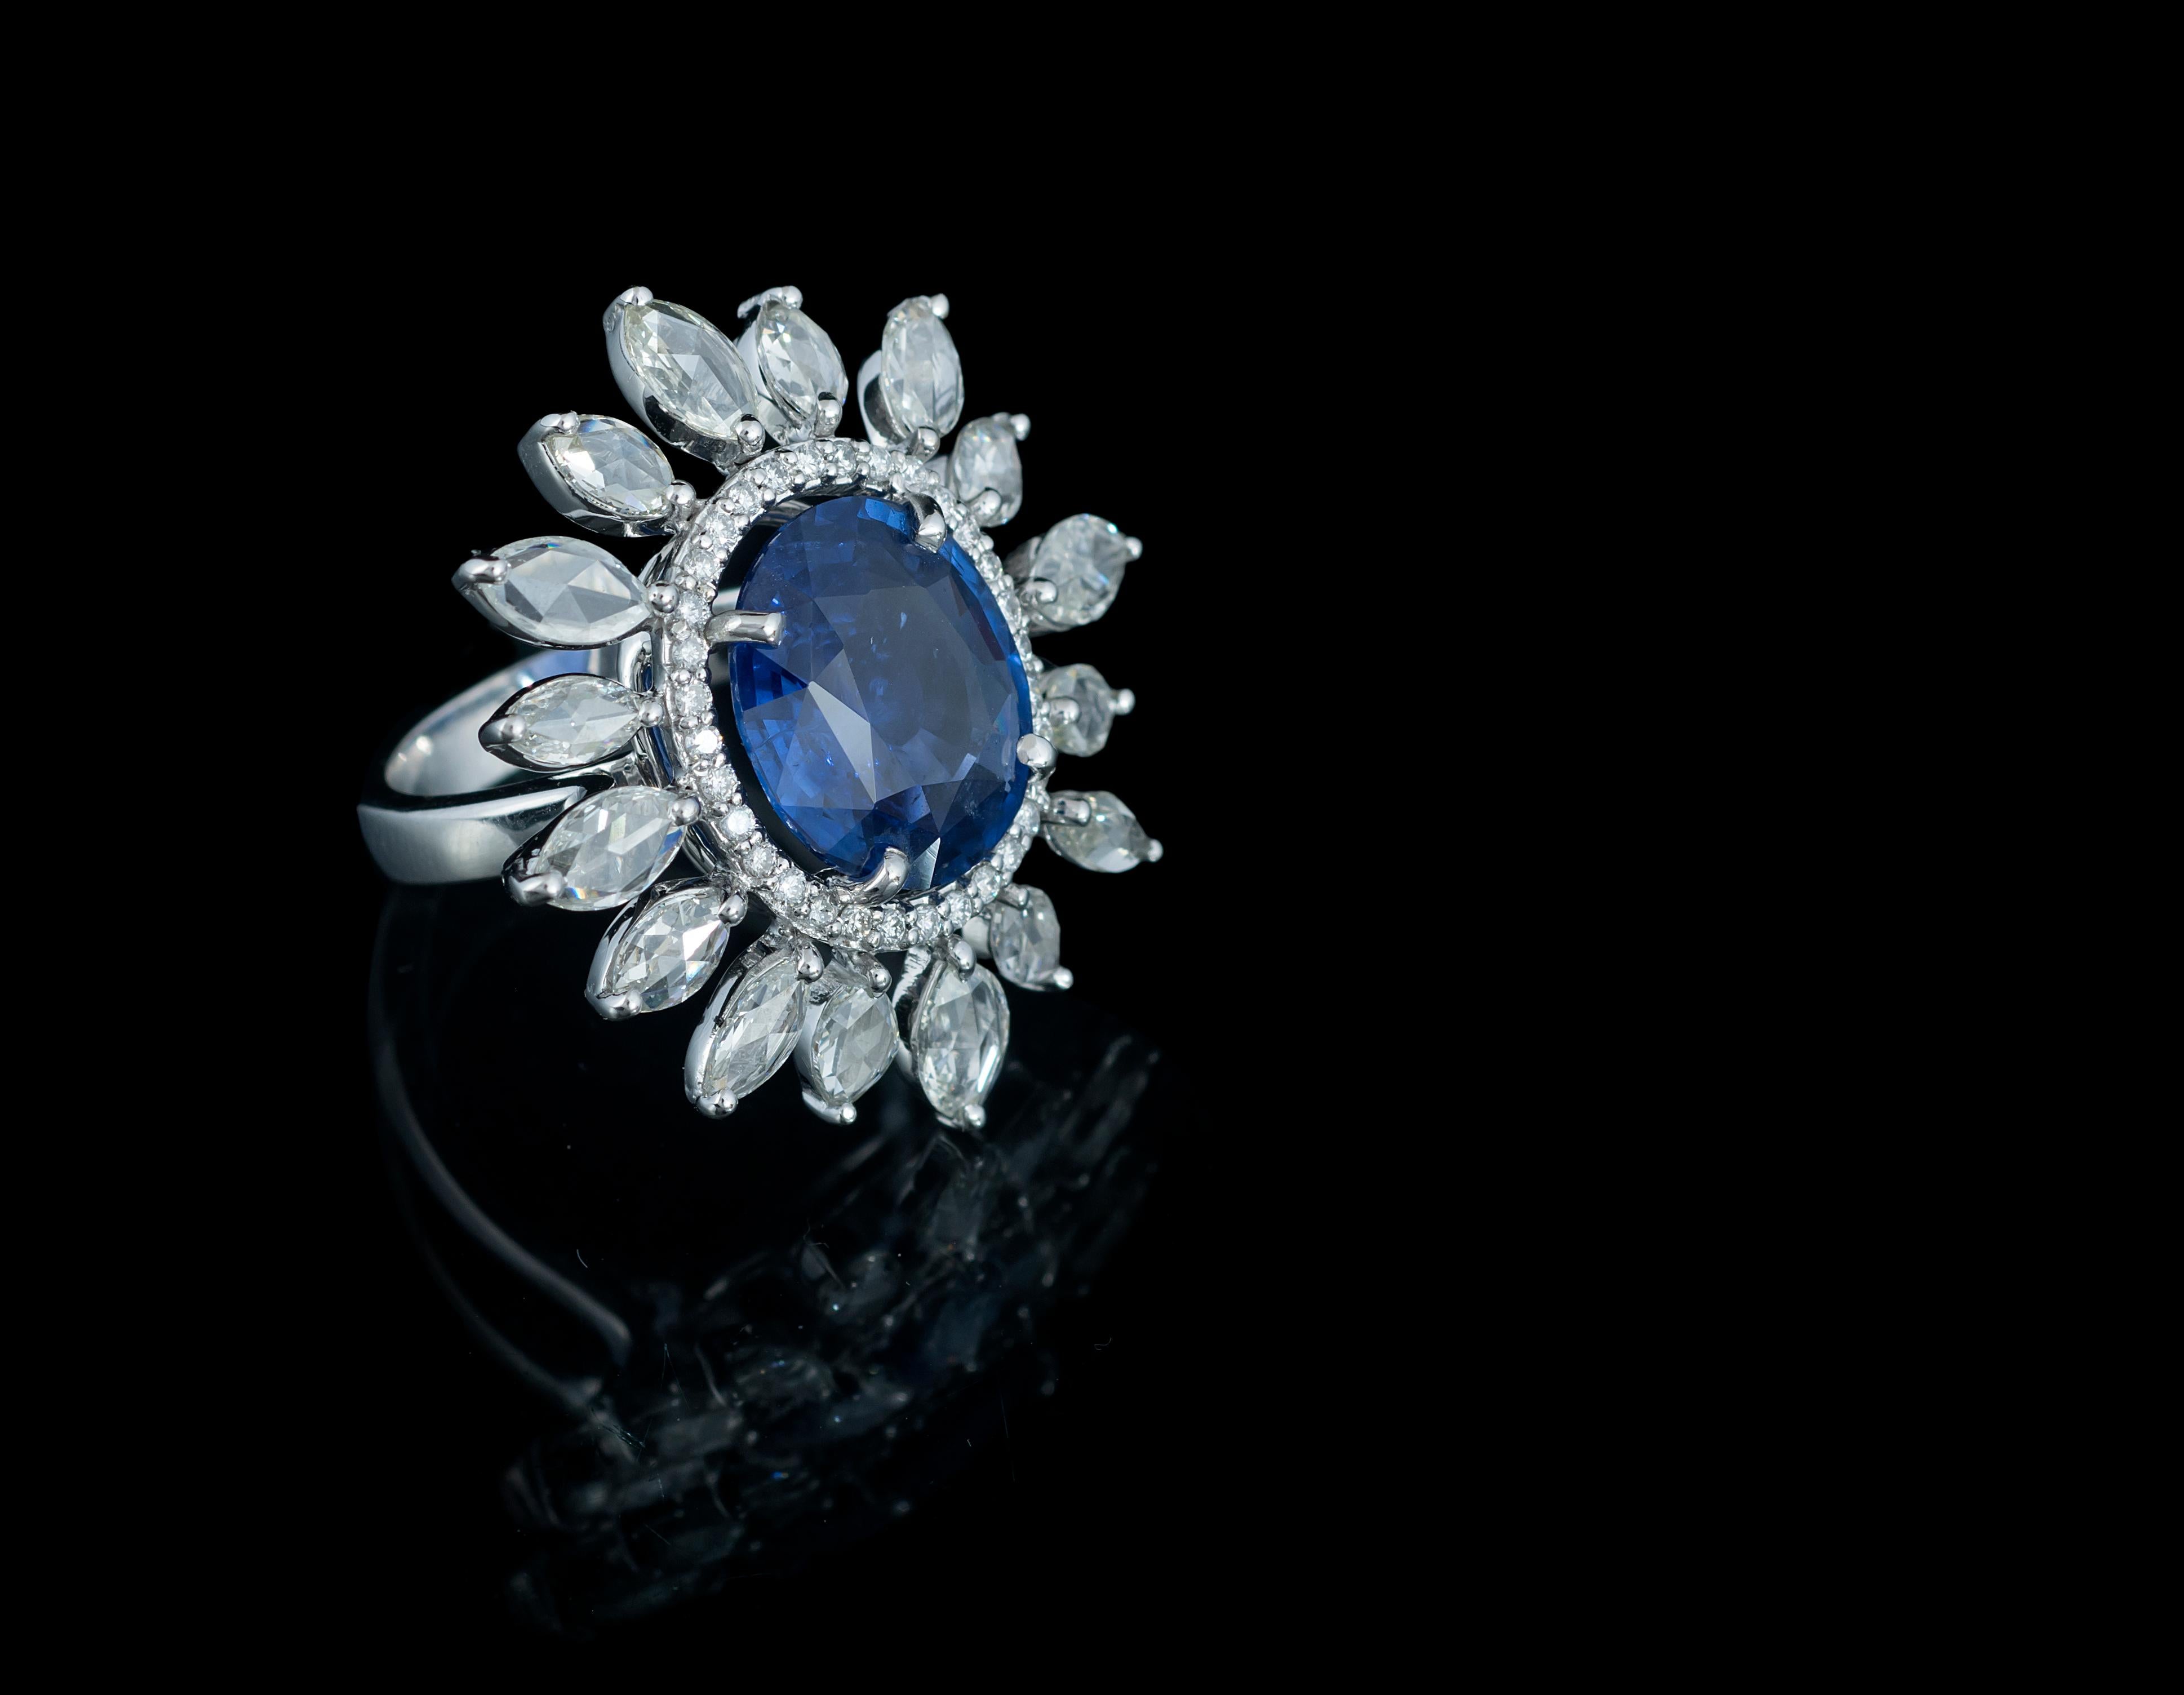 Gorgeous, blue sapphire and rose cut diamond cocktail ring set in 18K white gold, The weight of the sapphire is 6.37 carats, and originates from Sri Lanka. The total weight of rose cut diamonds 2.21 carats. The ring is made in Indian ring size 12